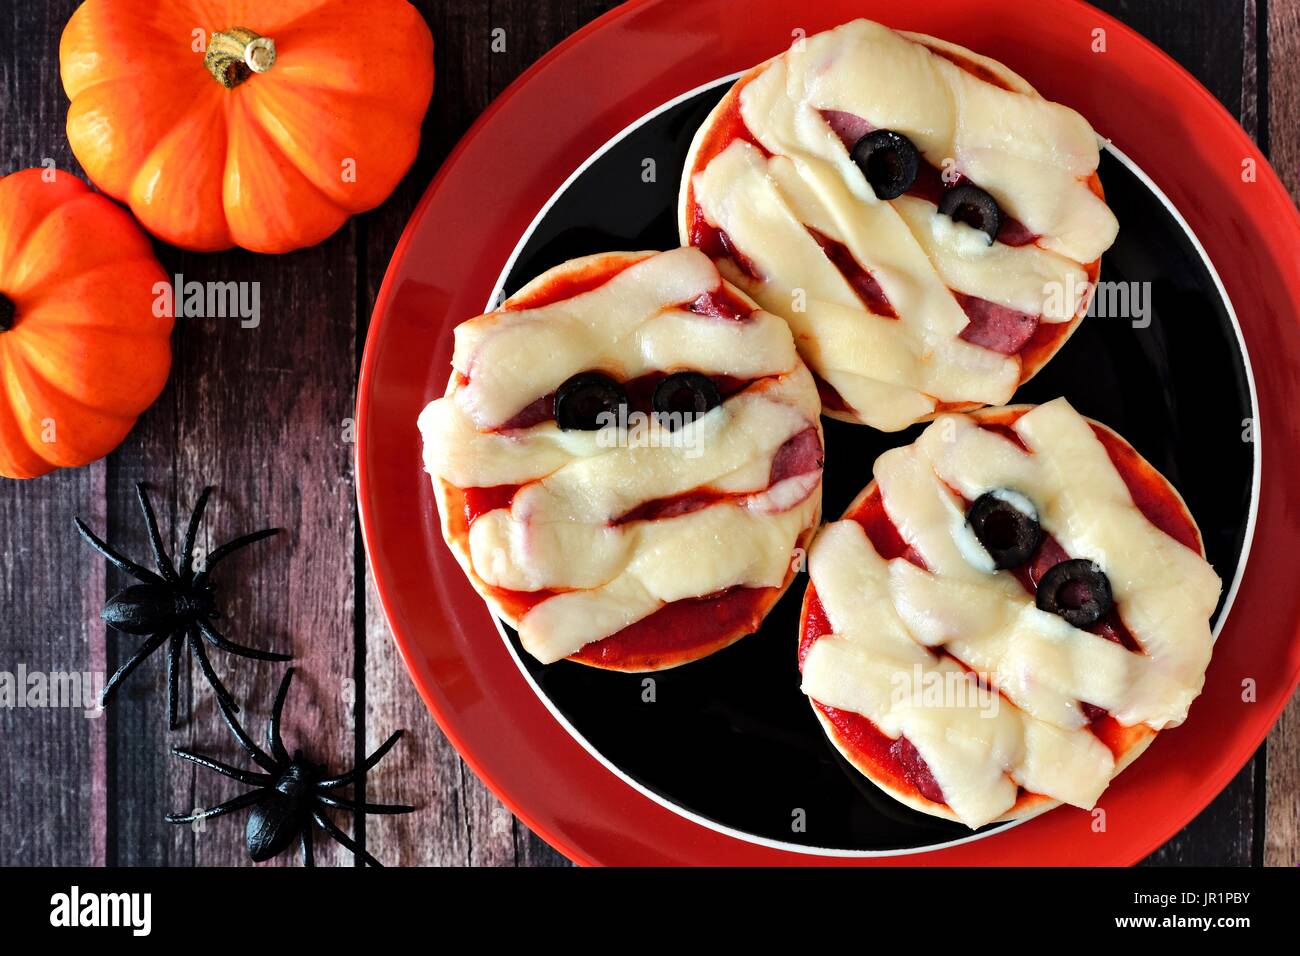 Halloween mummy mini pizzas on black and orange plate over rustic wood background Stock Photo